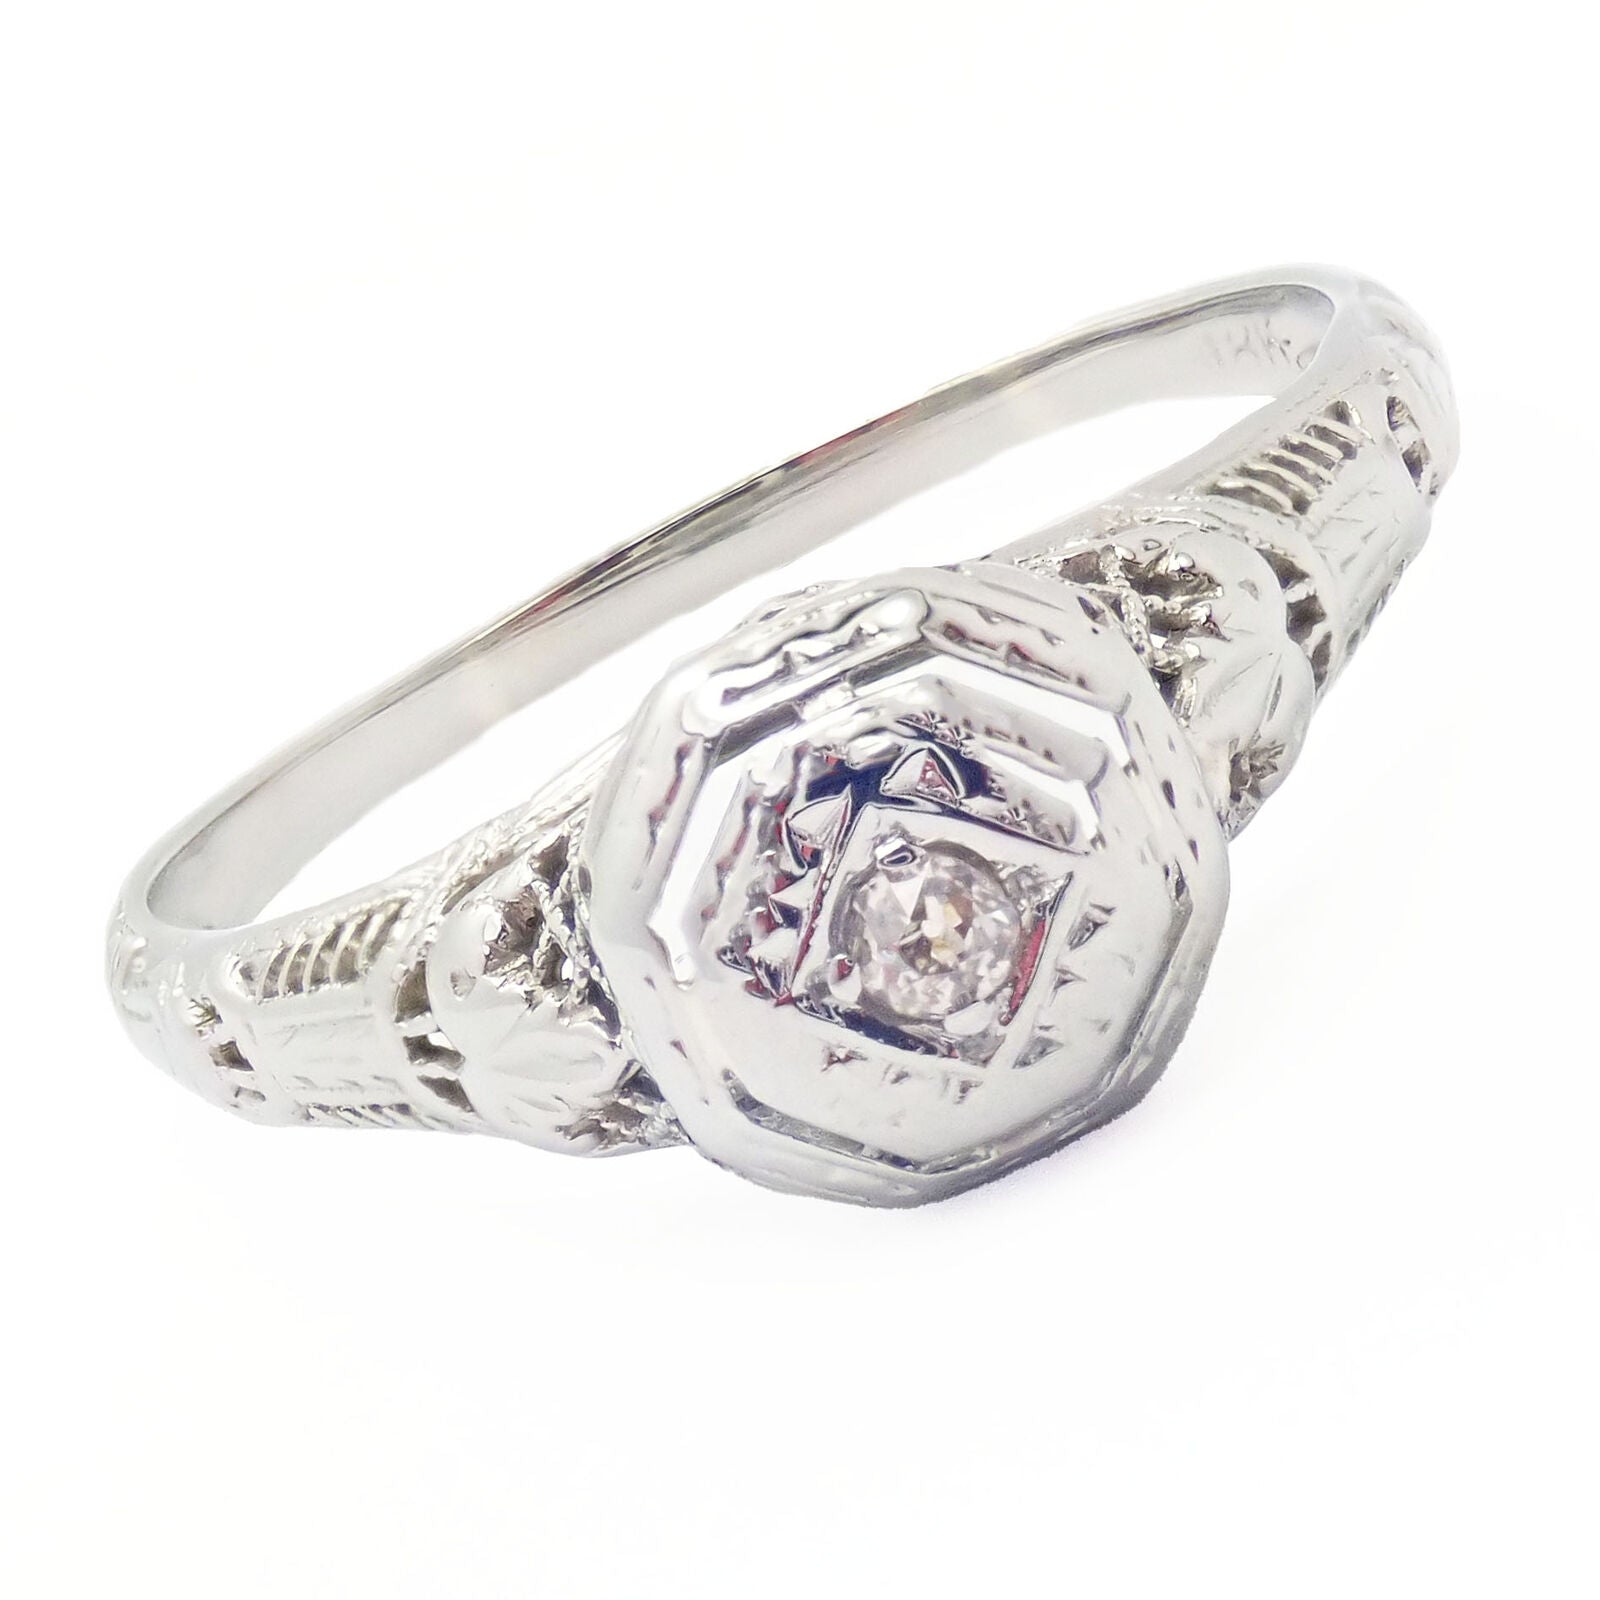 Estate Jewelry & Watches:Vintage & Antique Jewelry:Rings Vintage Estate 18k White Gold Old Mine Cut Diamond Art Deco Filigree Ring sz 8.5